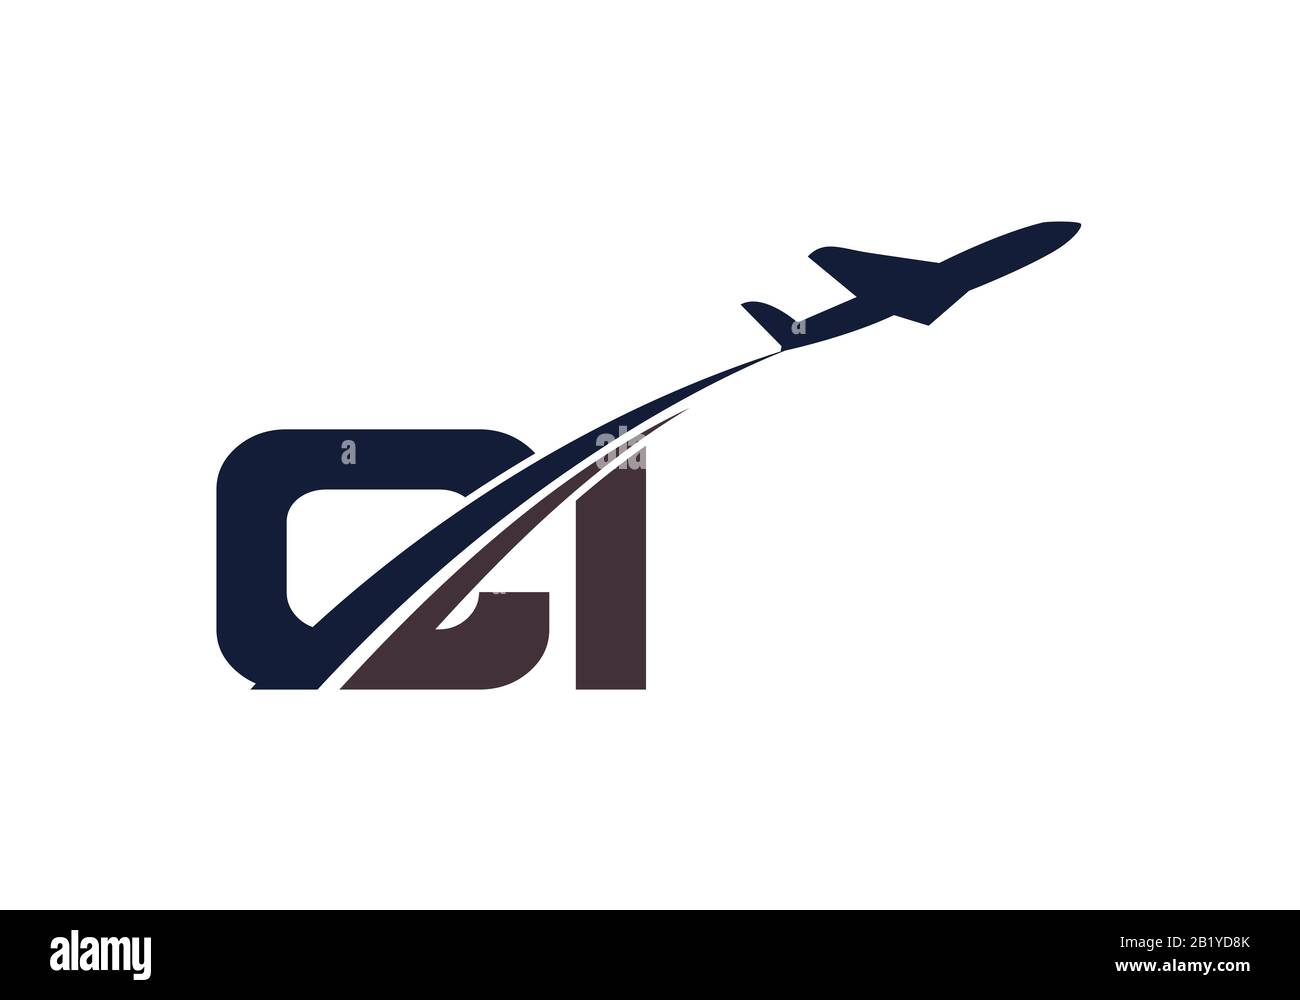 Initial Letter C and I  with Aviation Logo Design, Air, Airline, Airplane and Travel Logo template. Stock Vector